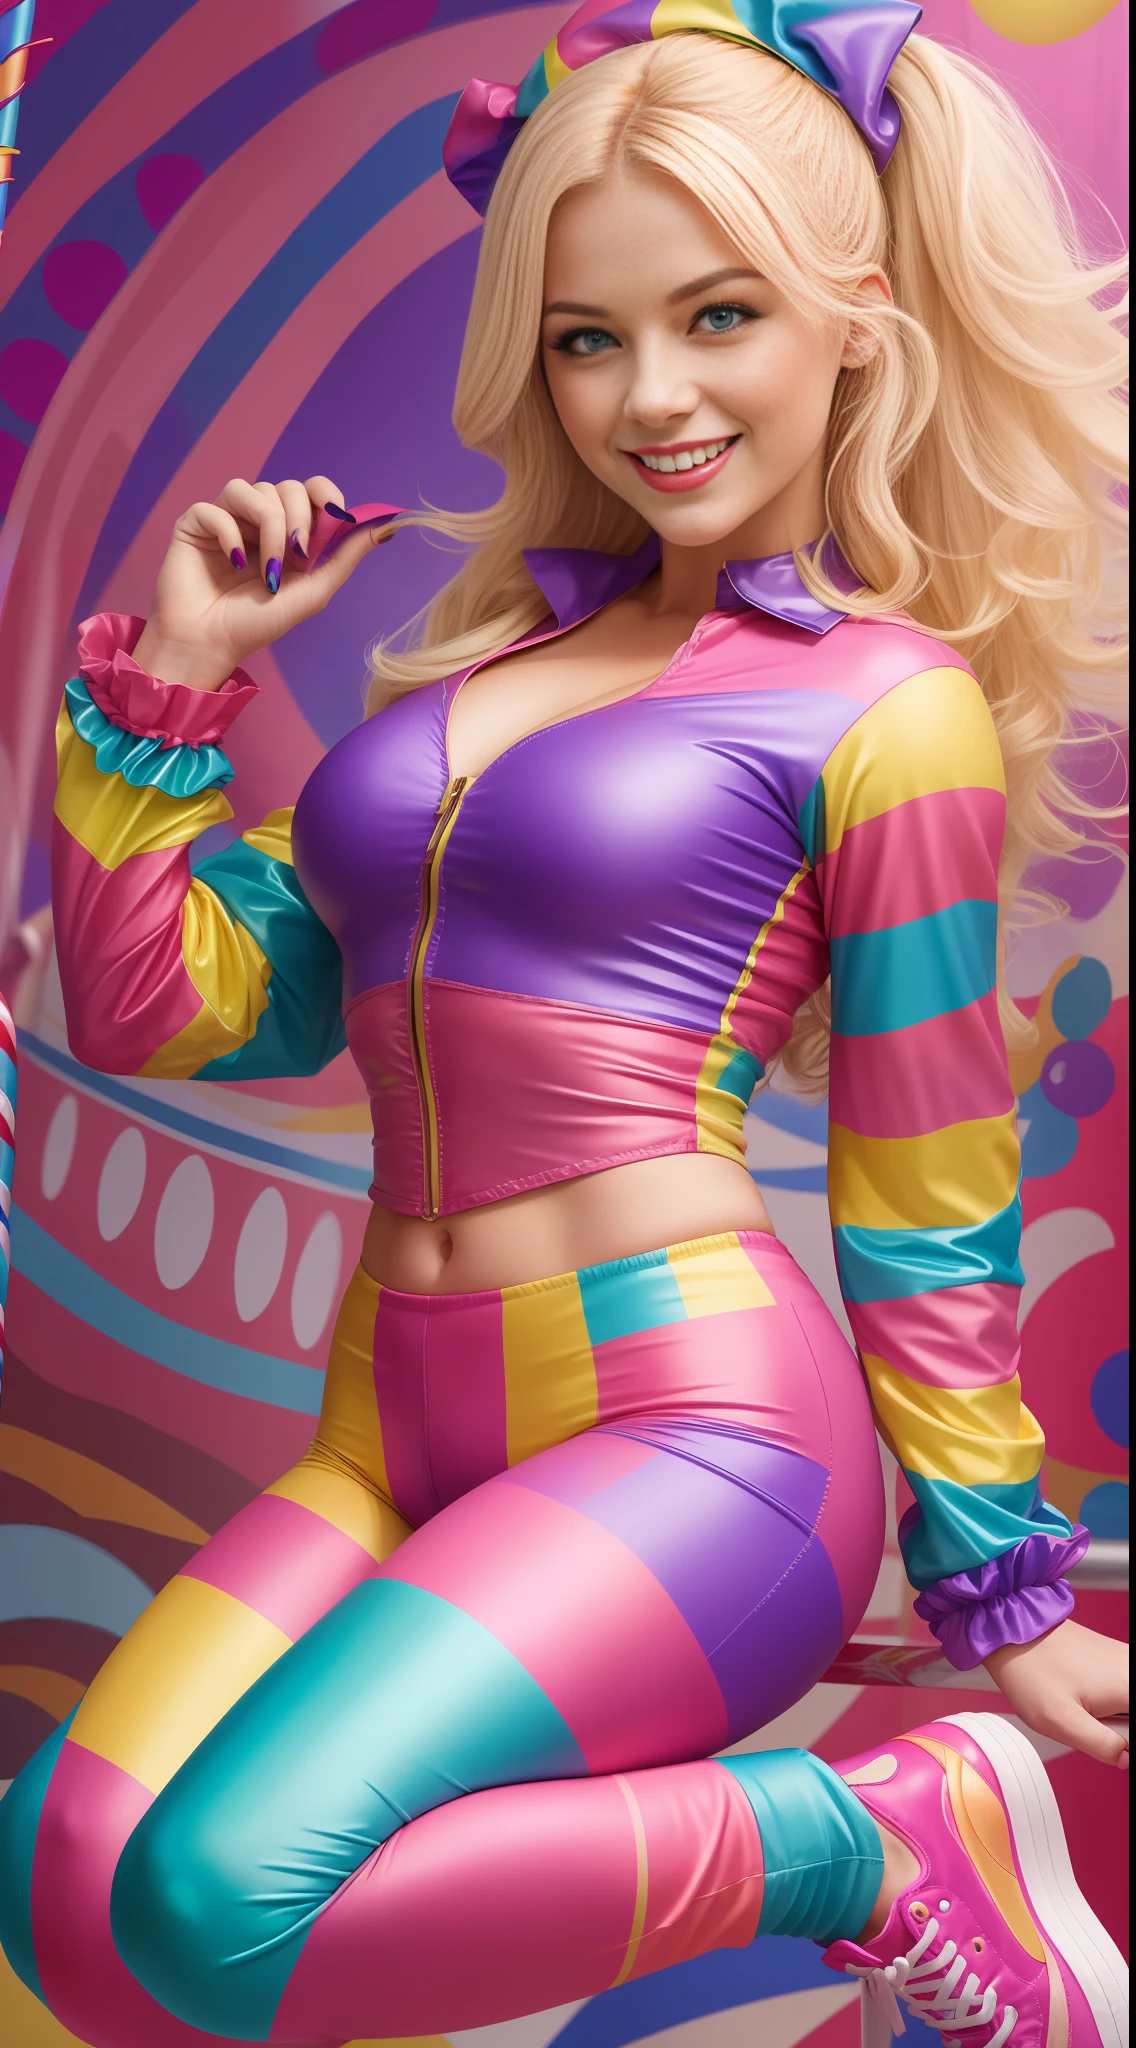 Woman, 22 years old European, blond, wearing a tight colourful pink clown suit, smiling, on a circus, Sunny, pink shoes